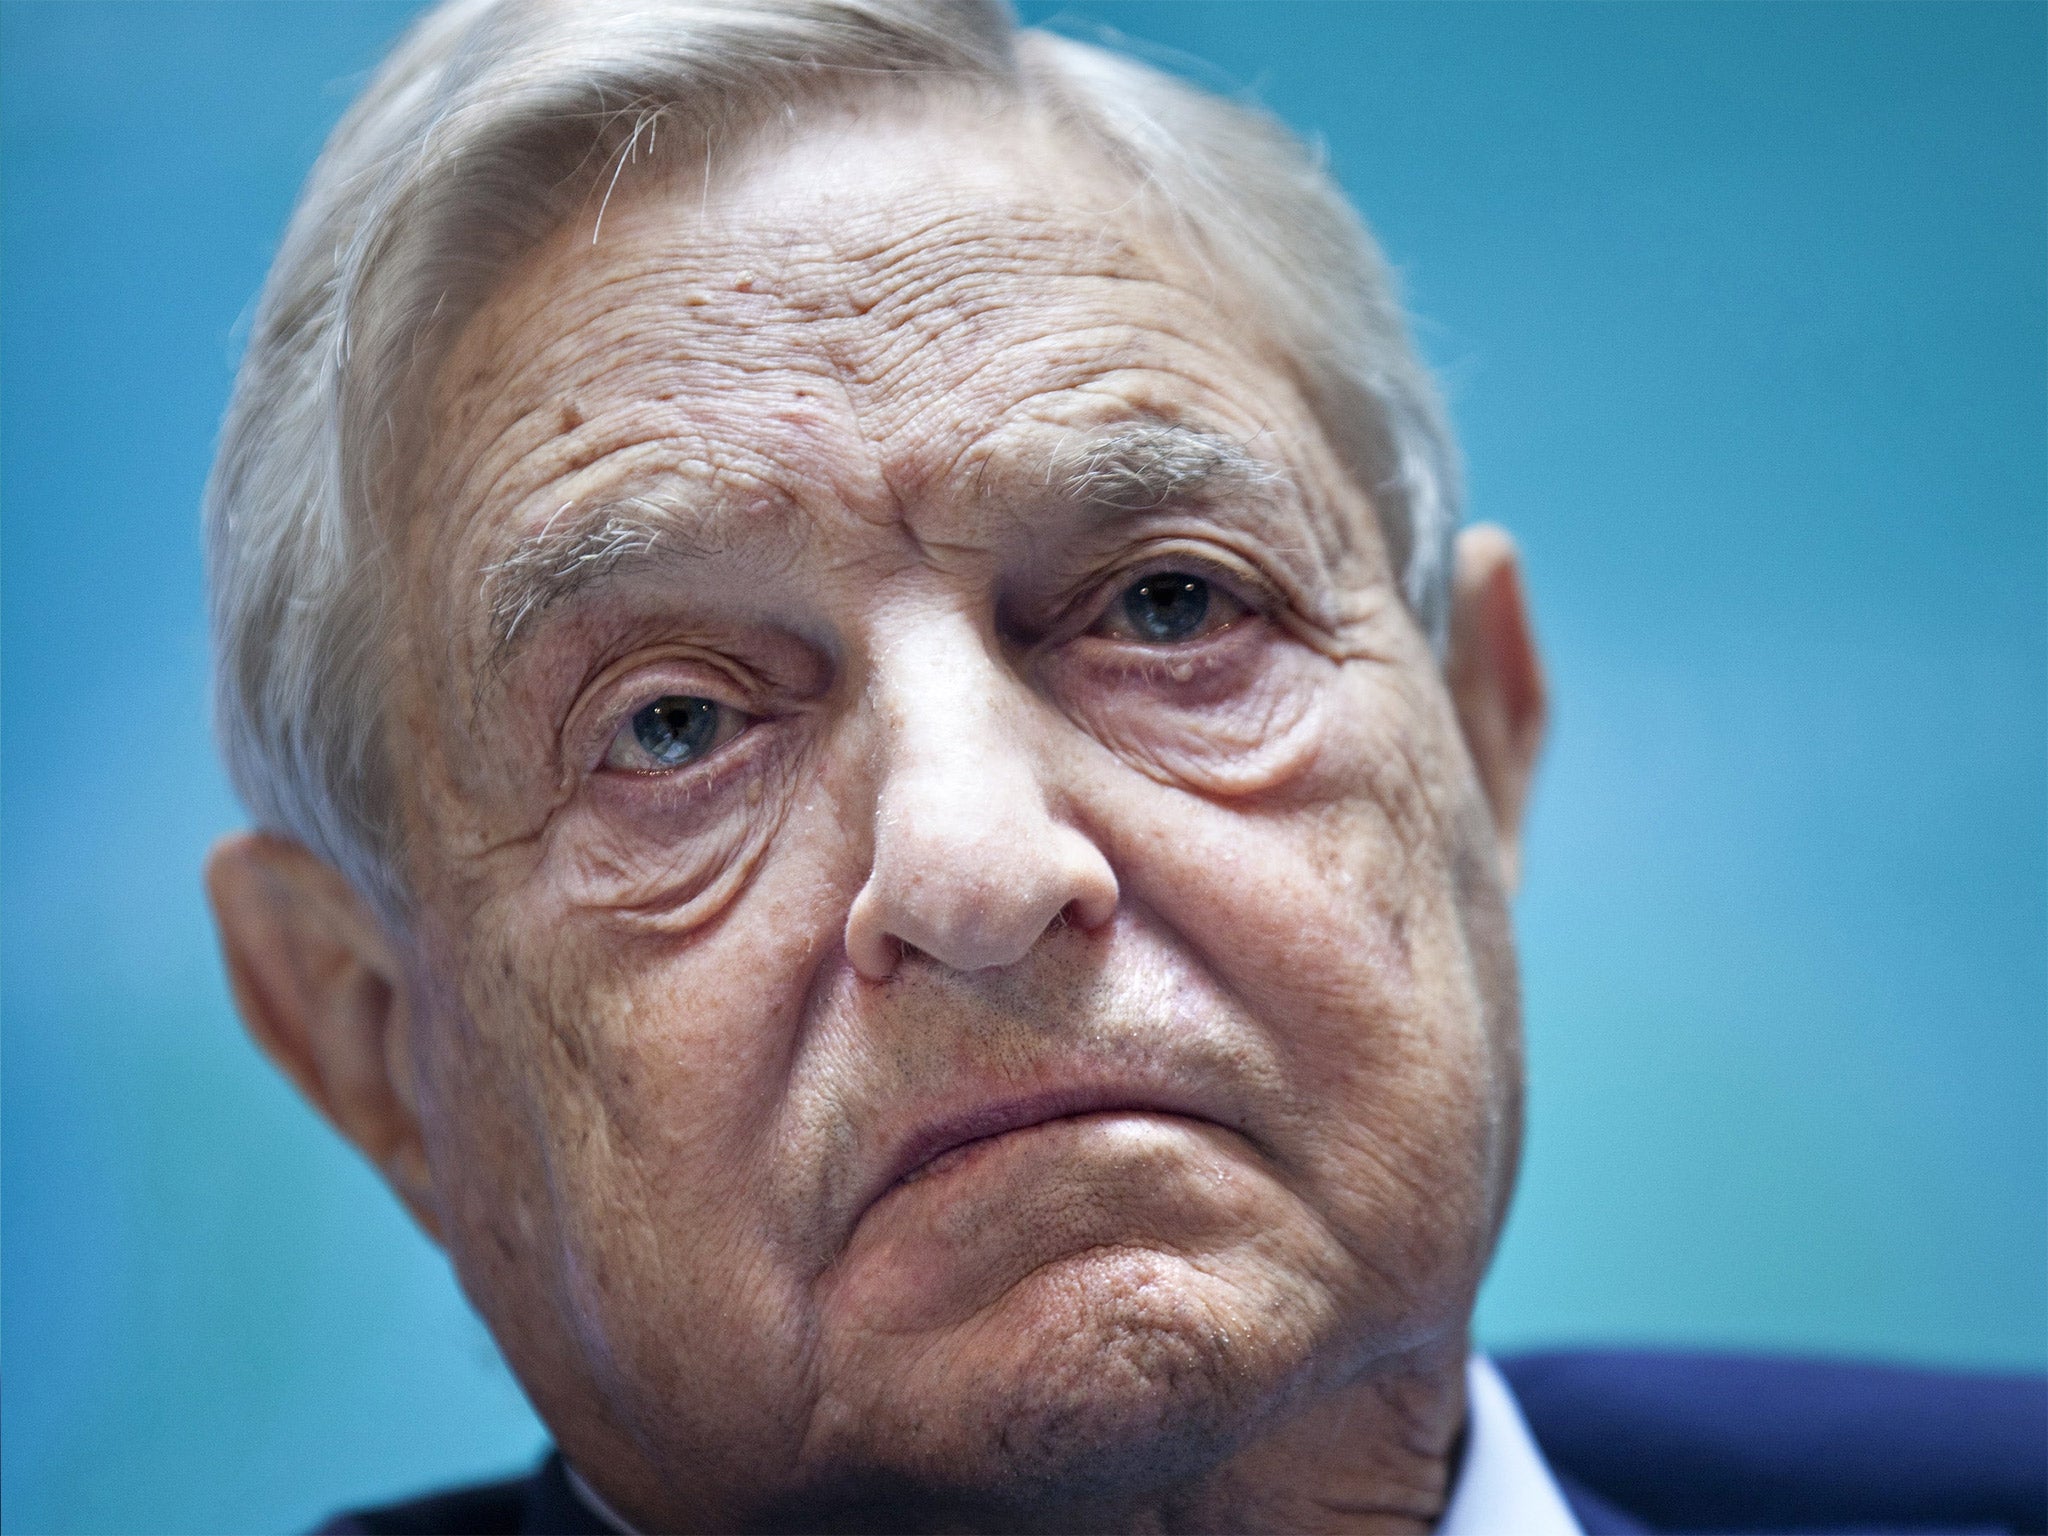 Mr Soros believes there is a strong chance the EU could crumble due to the migration crisis